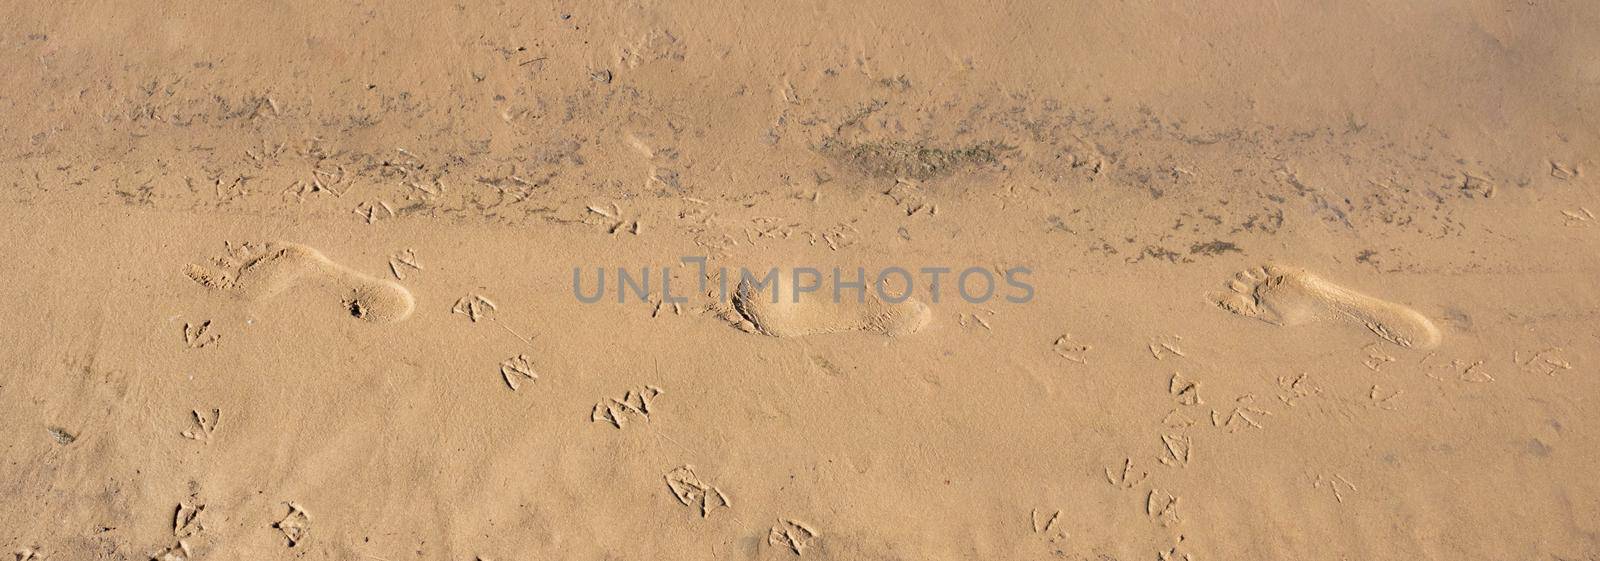 A chain of relief footprints, a trail of footprints of one person. The image of a lonely path in the sand by lapushka62